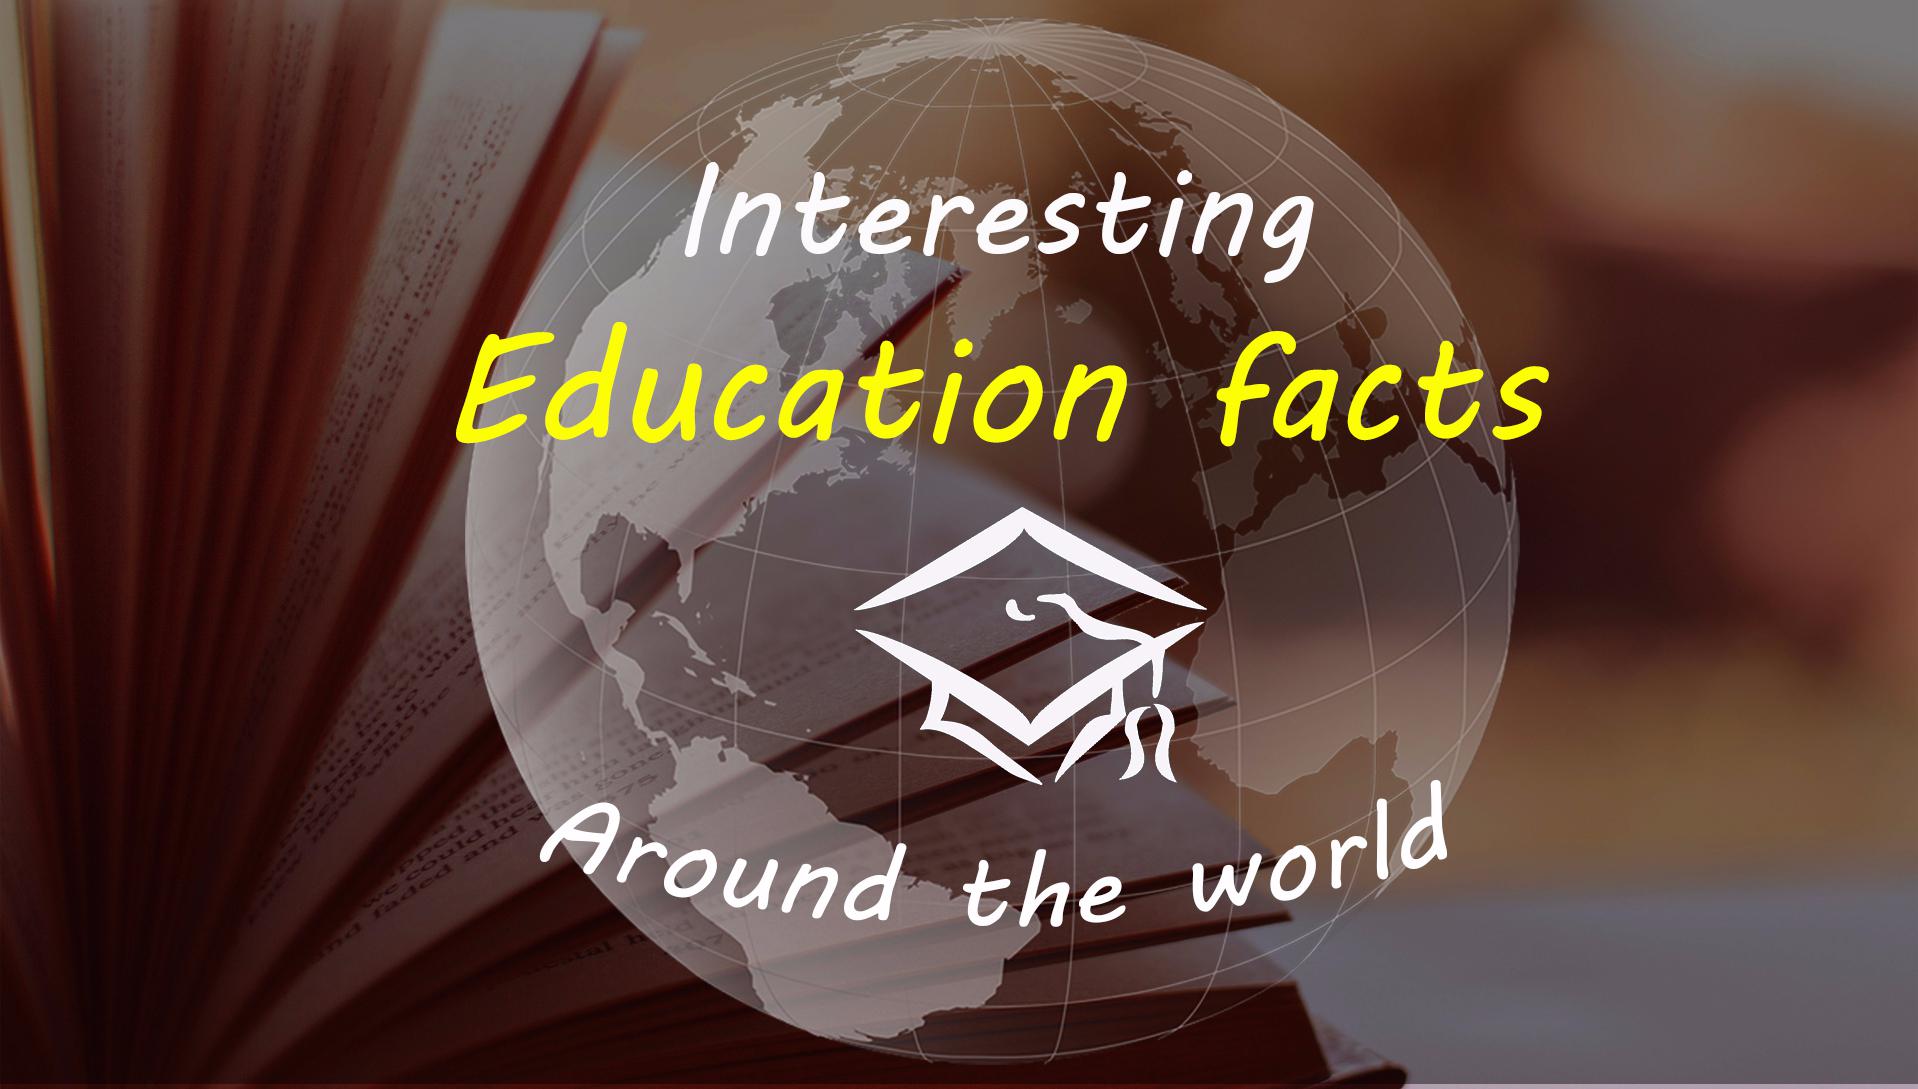 Interesting Education Facts Around the World